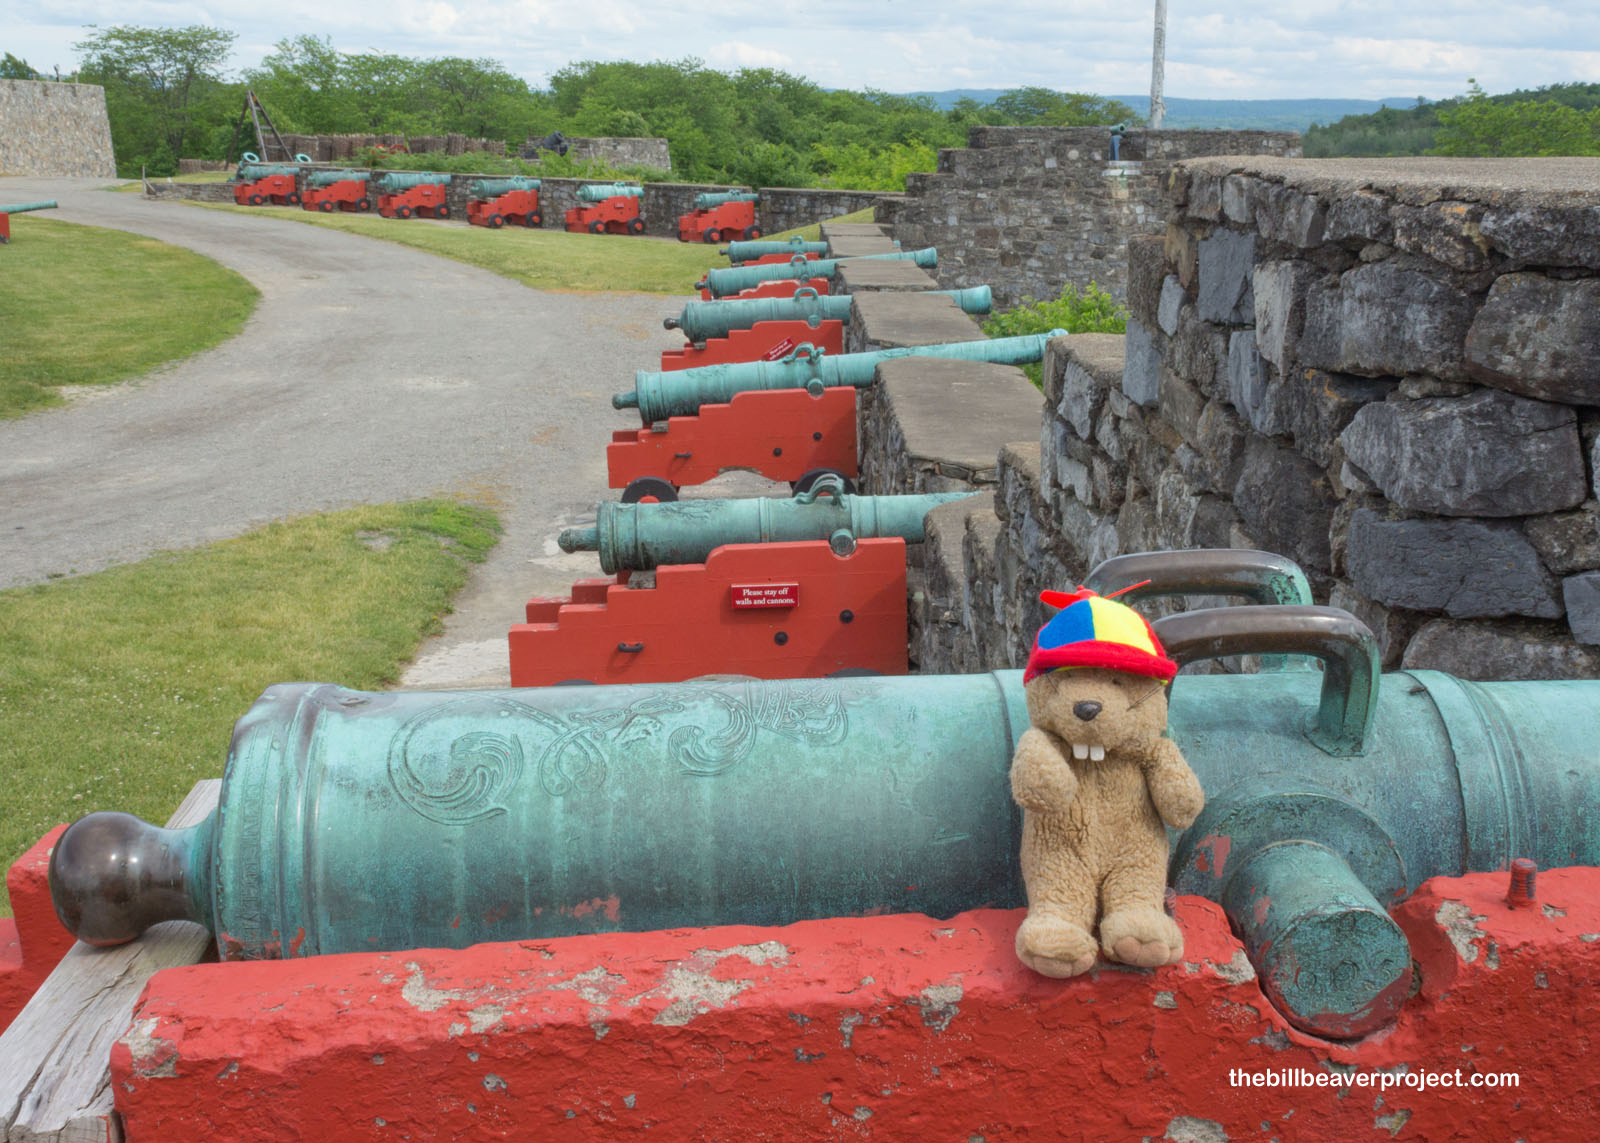 All these cannons would have been an intimidating sight back in the 18th Century!